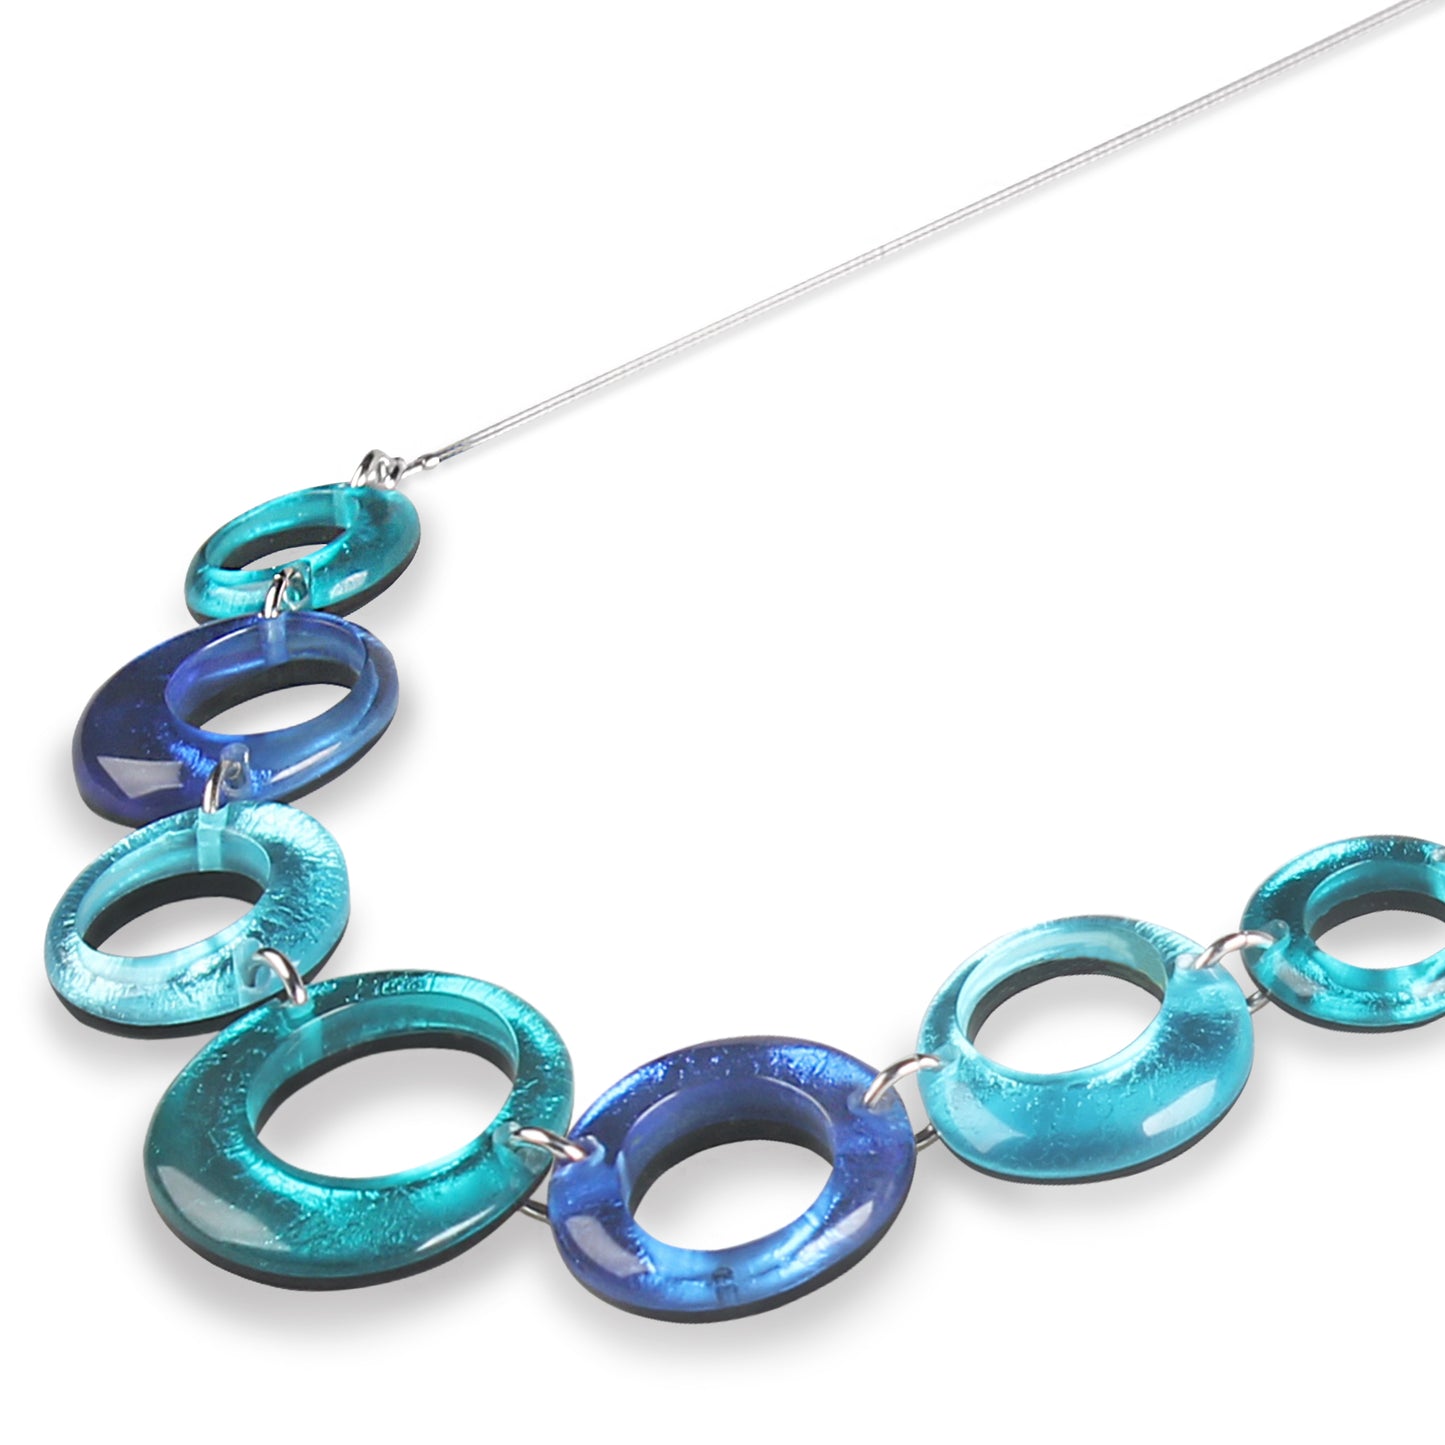 Riviera Hollow Circles Necklace